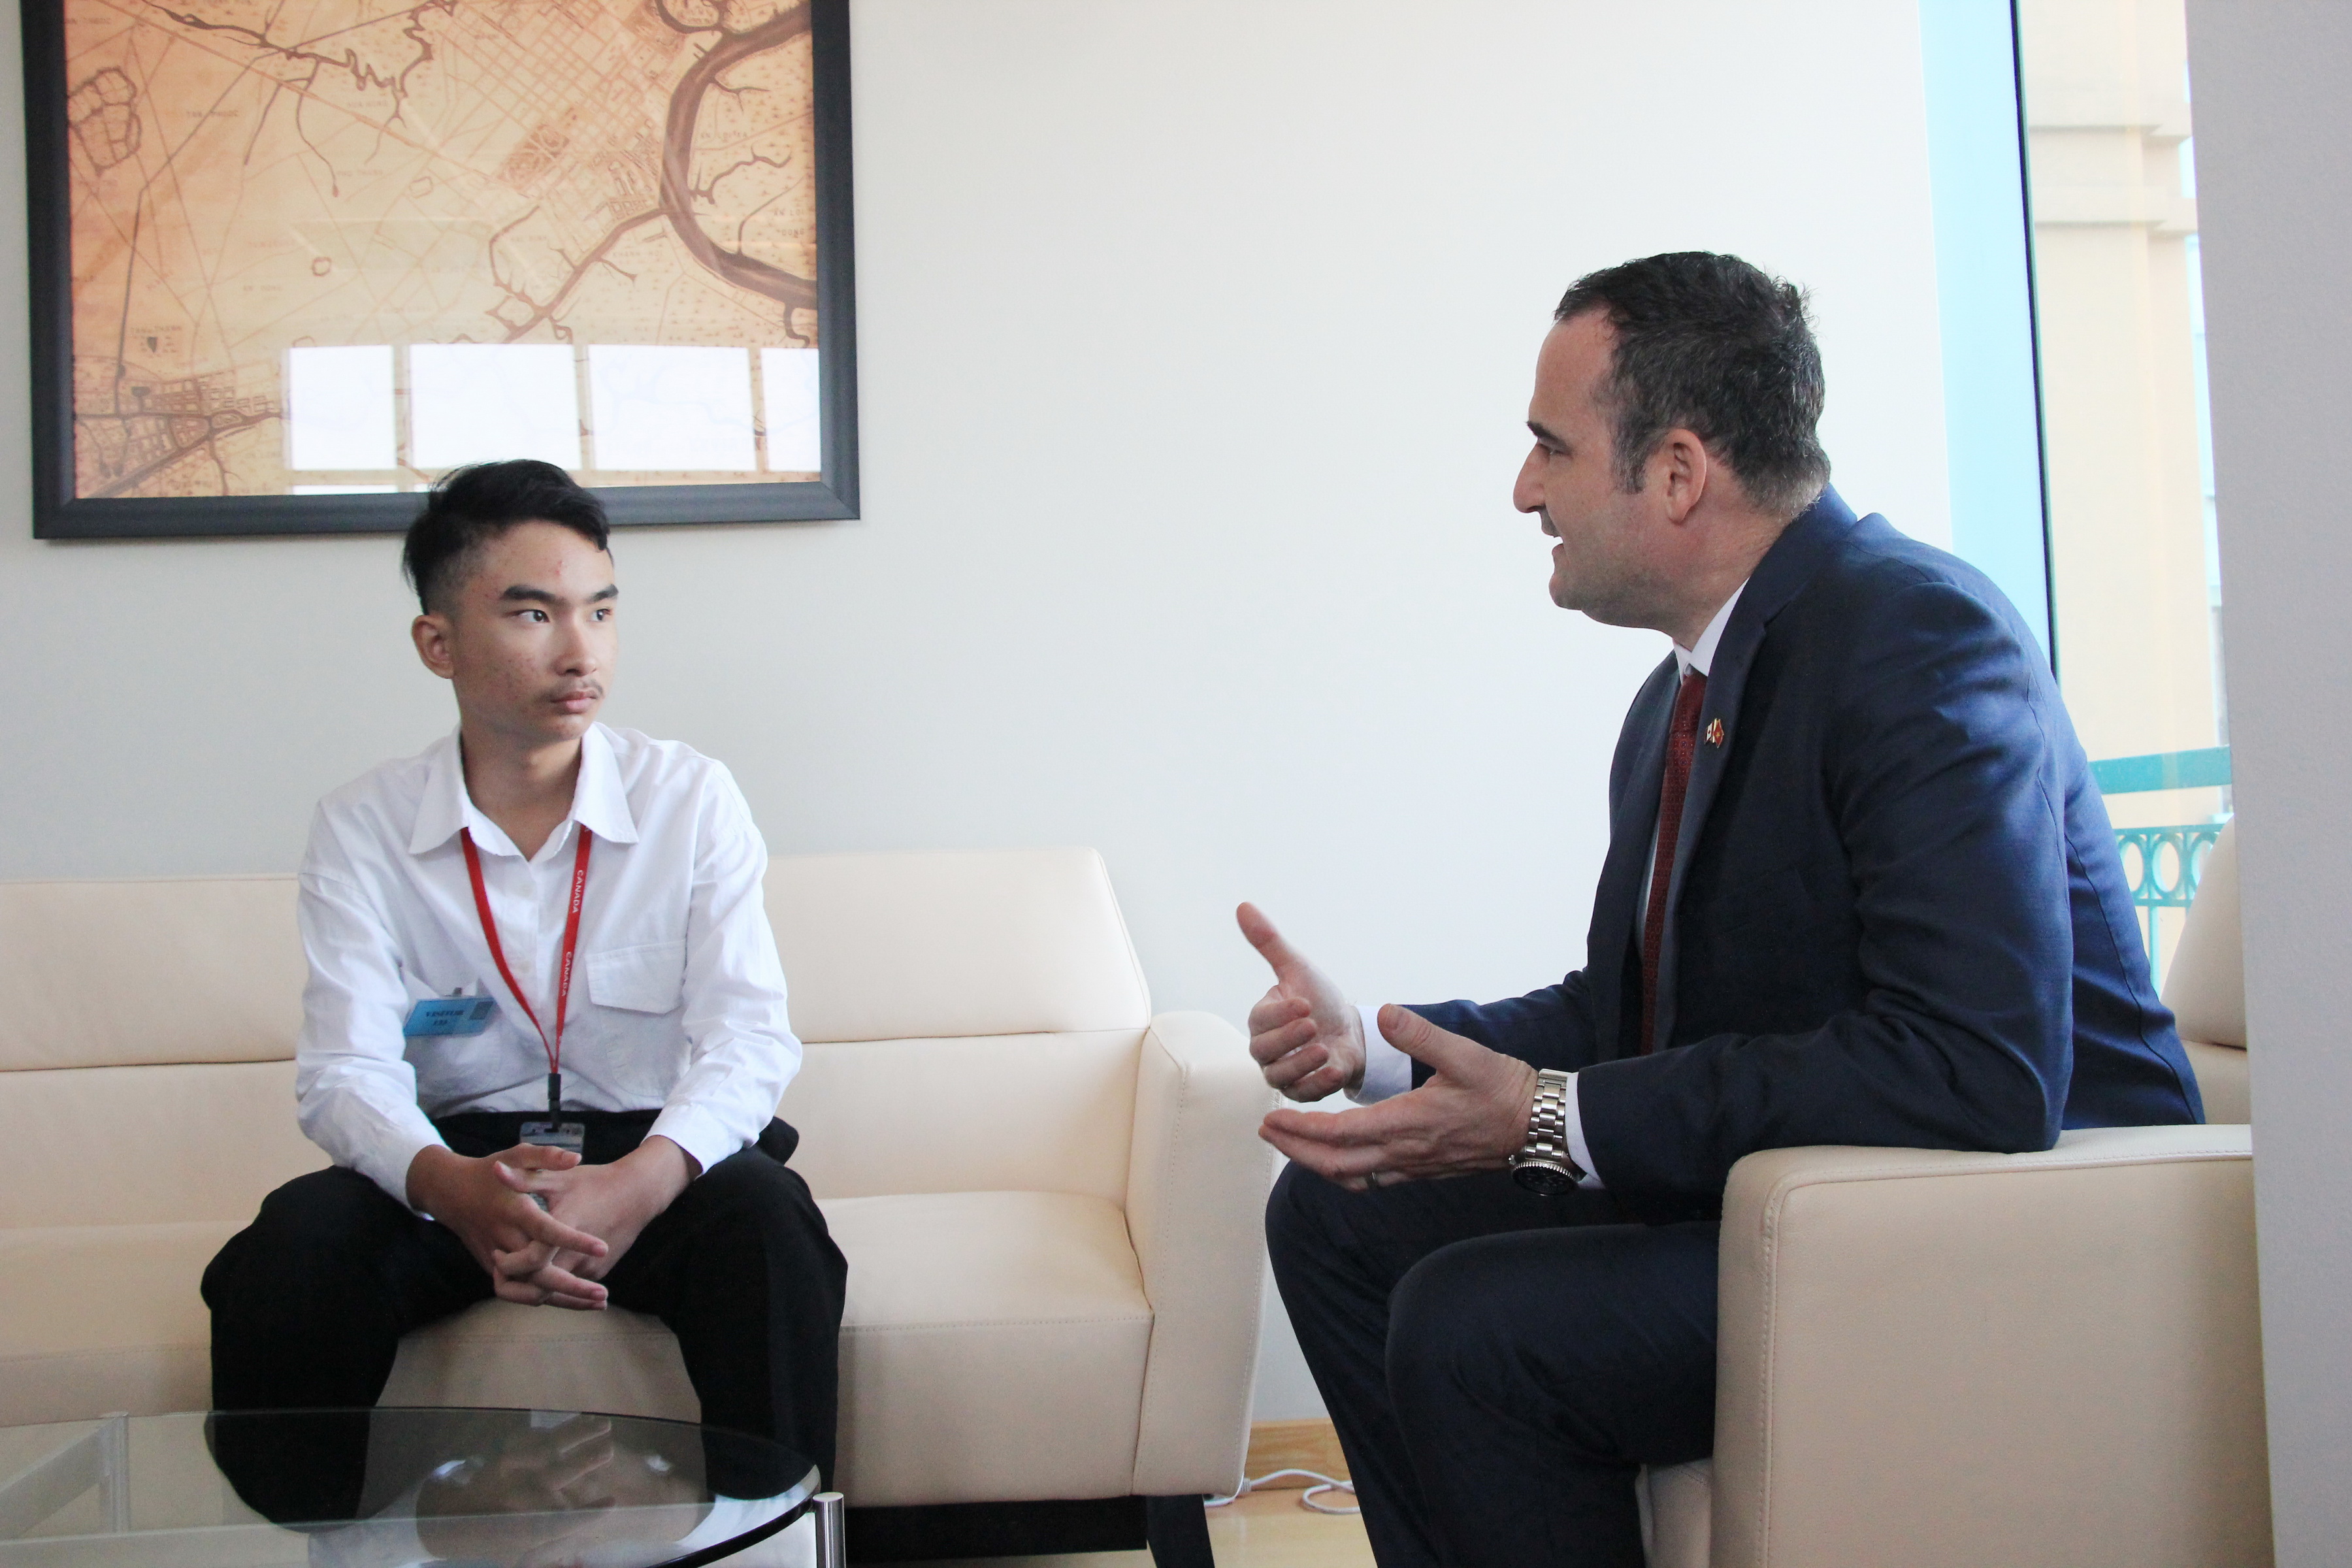 Canadian Consul General Kyle Nunas talks to Le Huy Tuan when he comes to the Consul General of Canada in Ho Chi Minh City to receive his 'duty' on February 19, 2020. Photo: Dong Nguyen/Tuoi Tre News